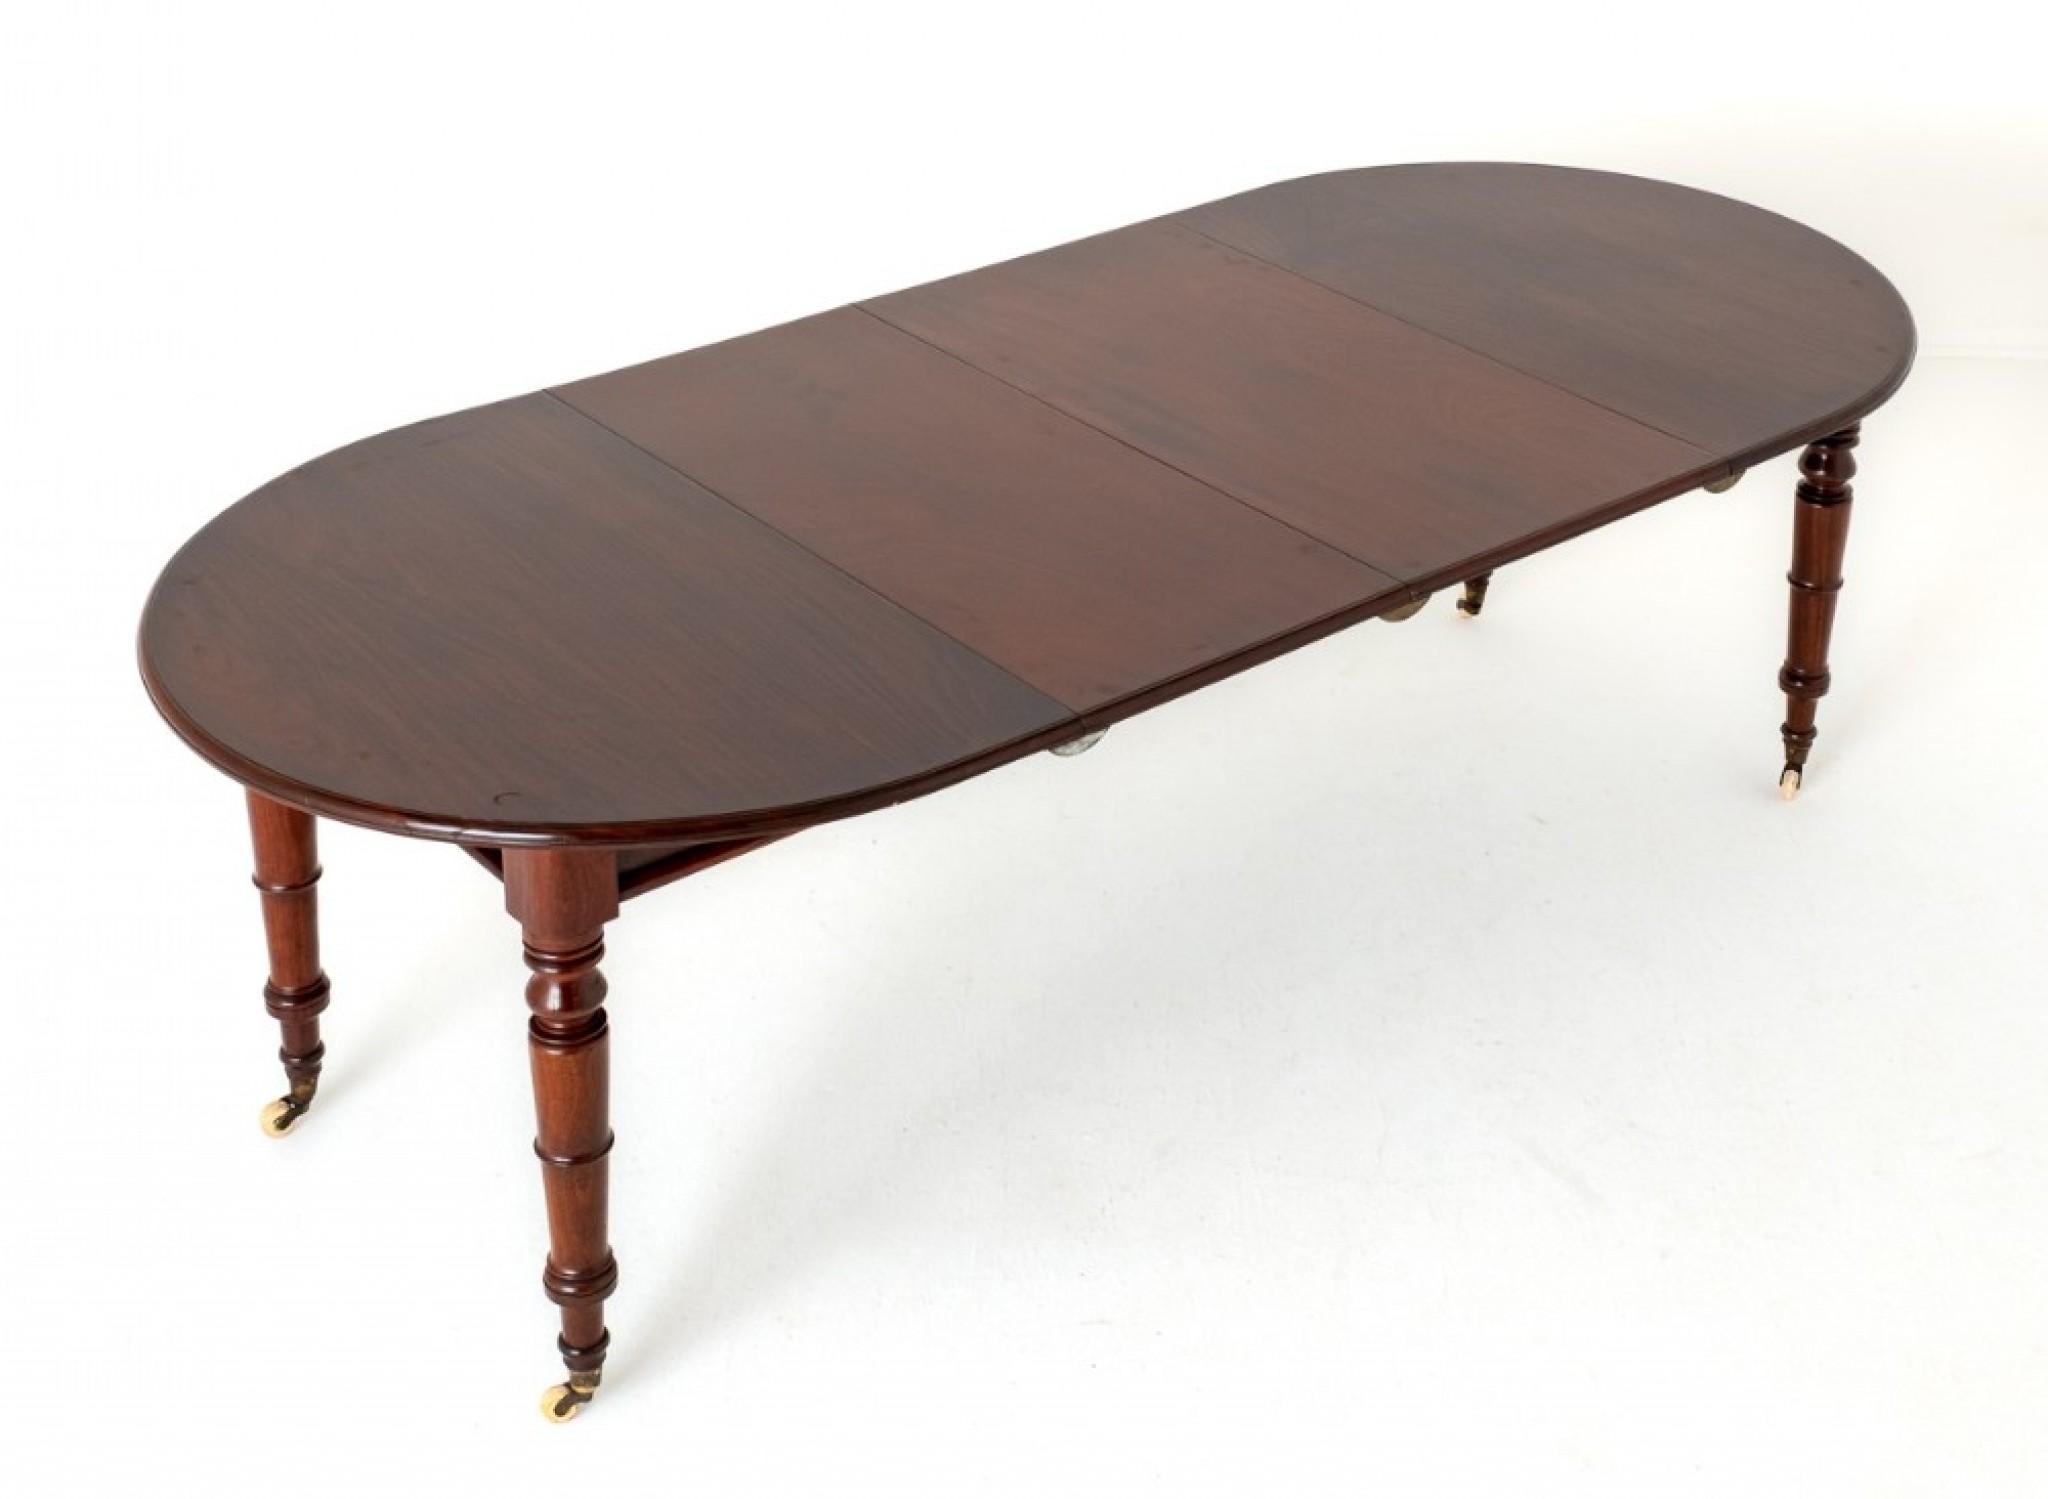 Victorian Mahogany 2 Leaf Extending Dining Table.
Circa 1860
This Dining Table Stands Upon Crisply Ring Turned Legs with Brass and Porcelain Castors.
When Closed The Table is of an Oval Form.
The Table Extends by way of a Pullout Telescopic